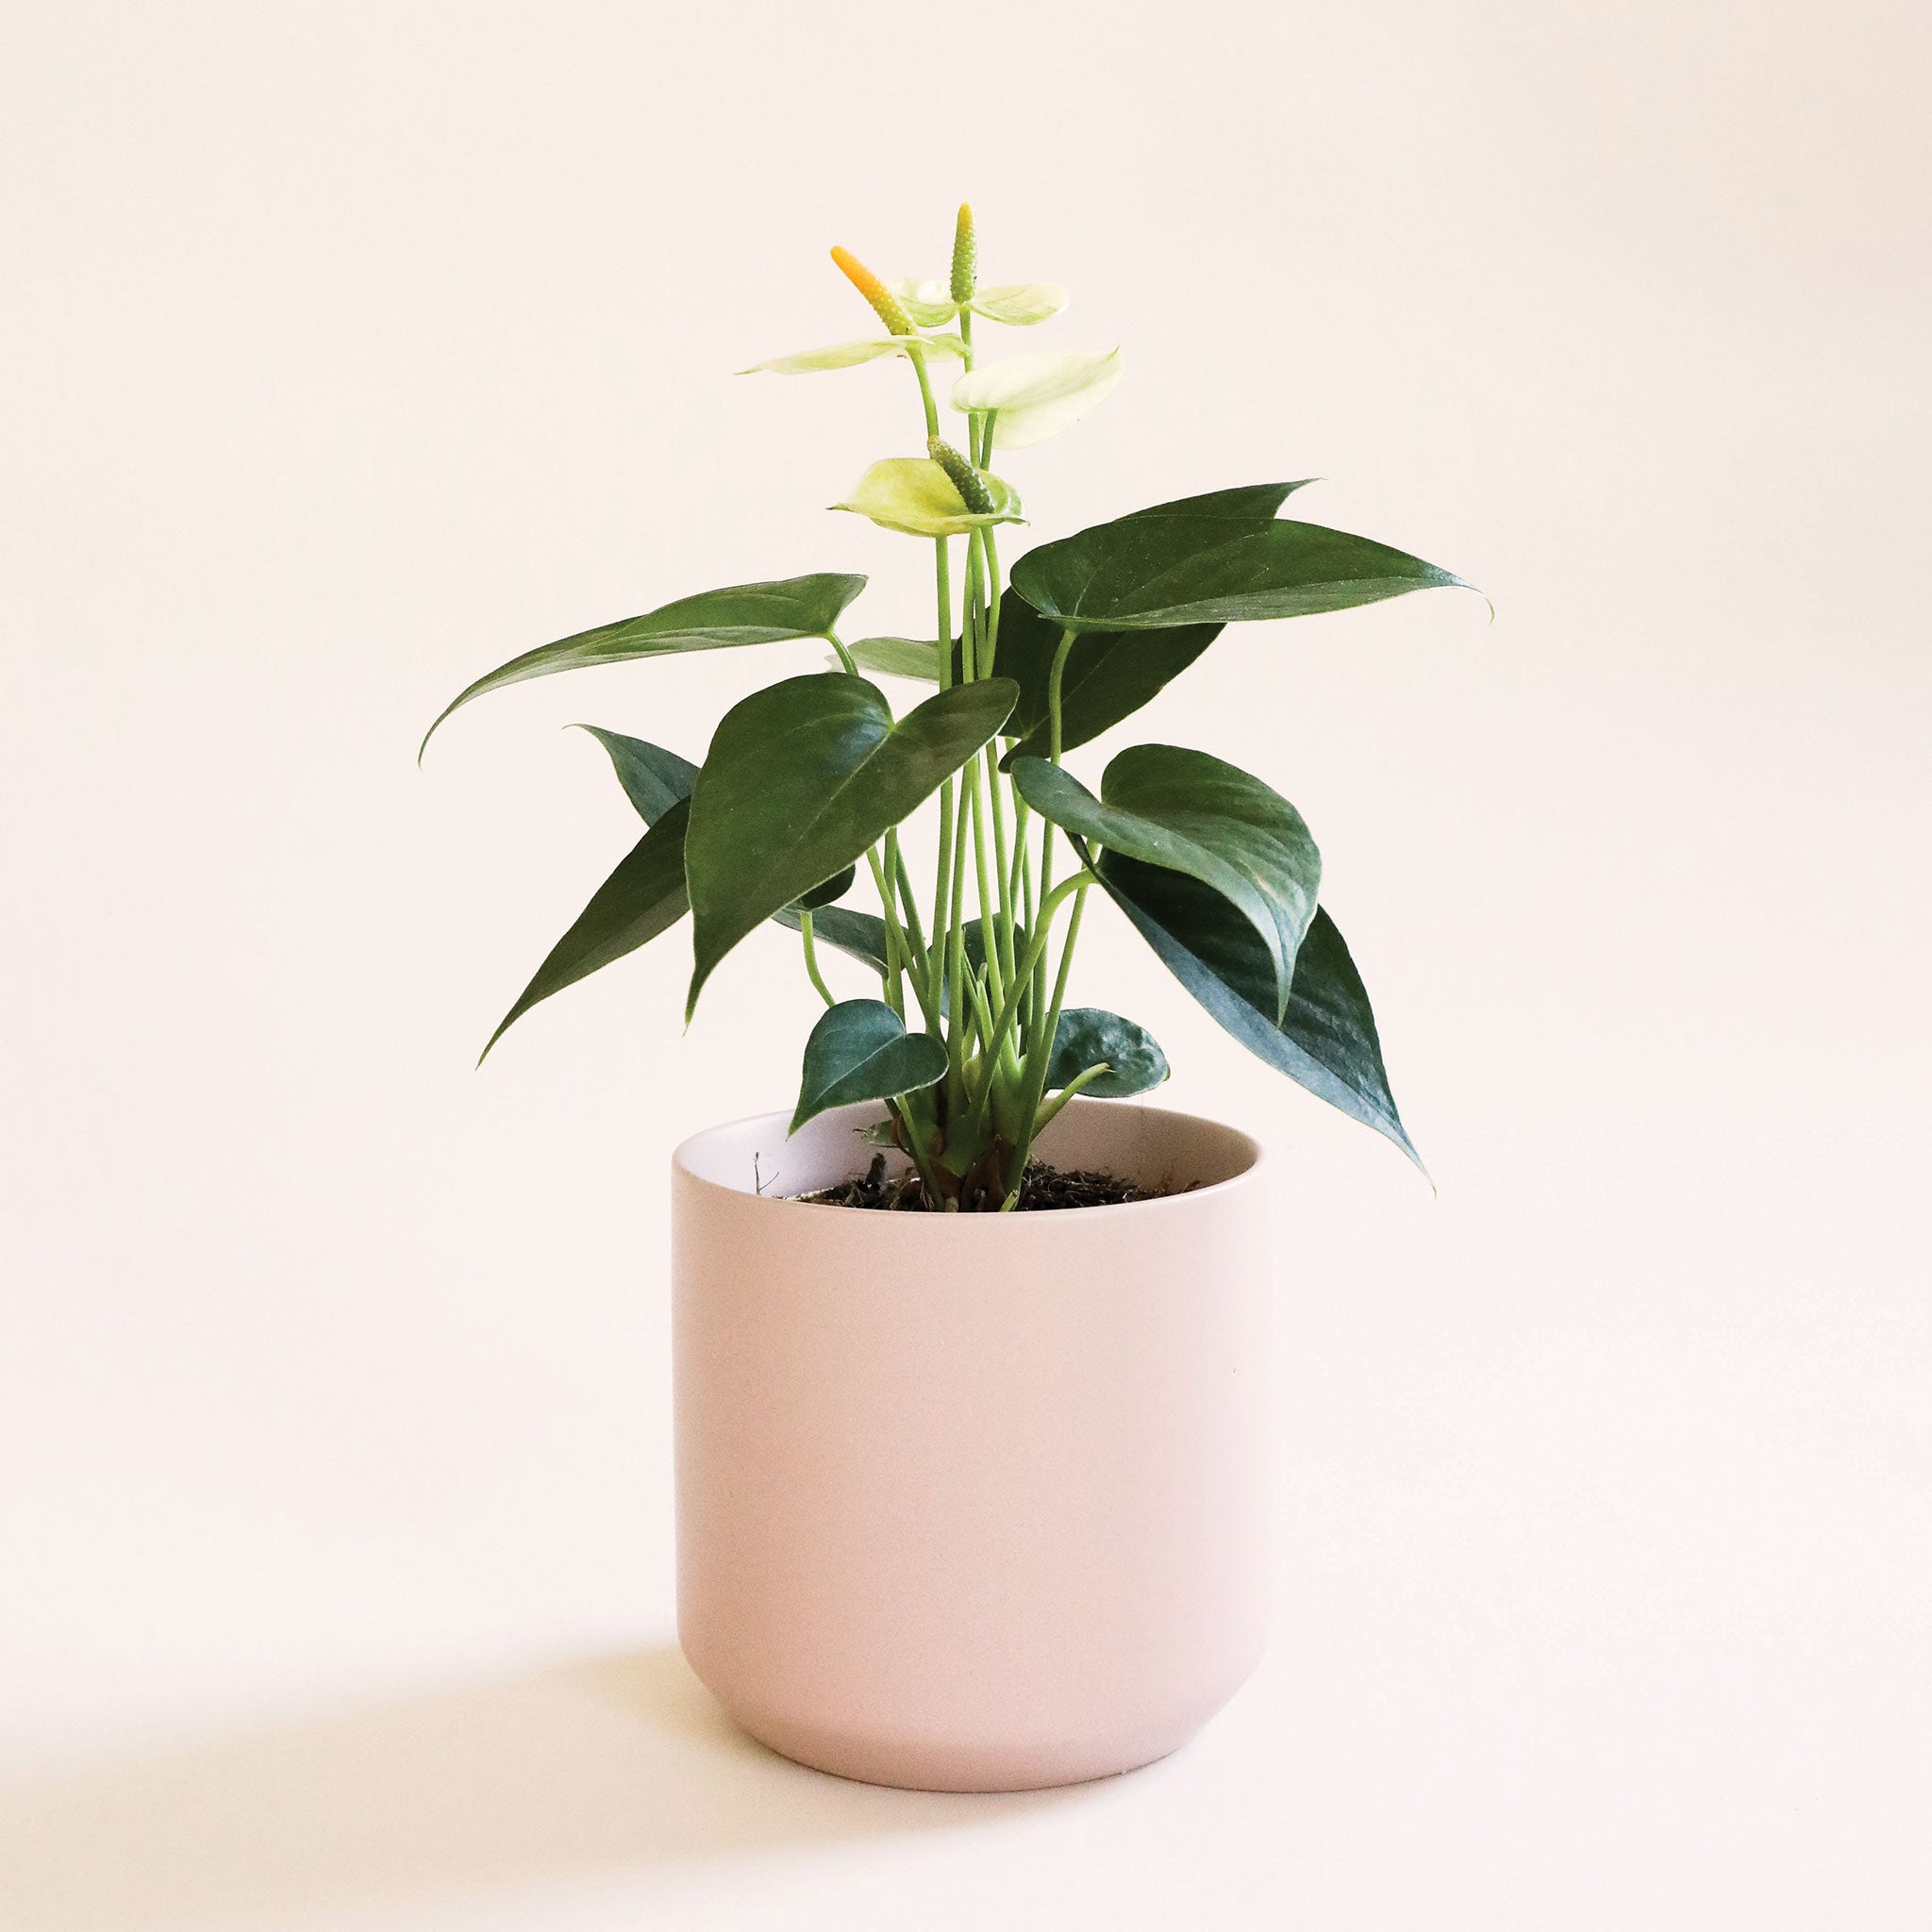 Anthurium White in a blush pot. Anthurium has dark spade shaped leaves and tall flat white petal flowers and white-green stamen.